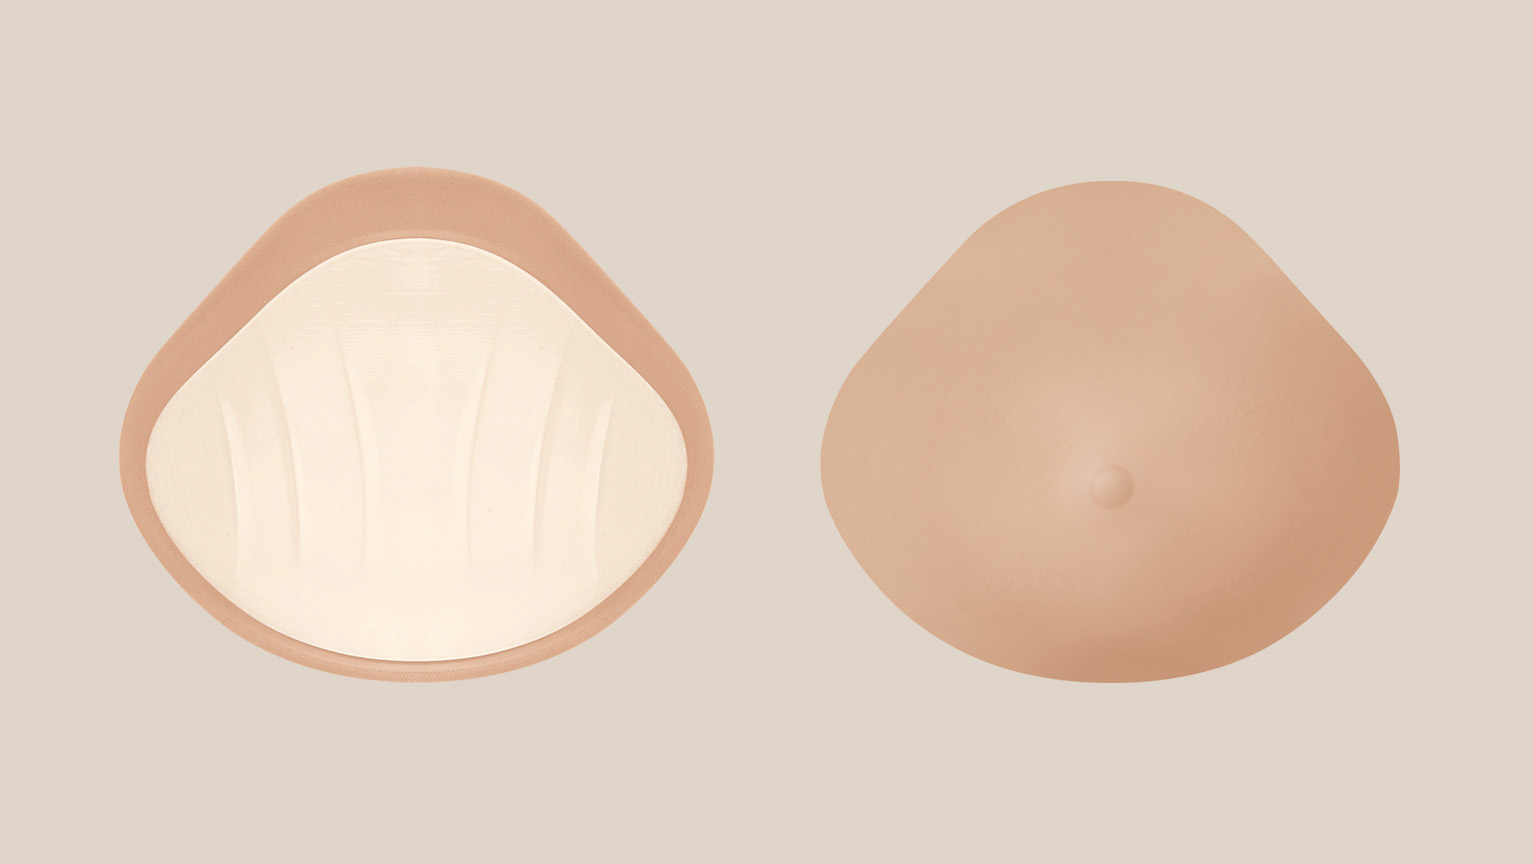 Softleaves Reellook Asymmetrical Silicone Breast Forms can be used